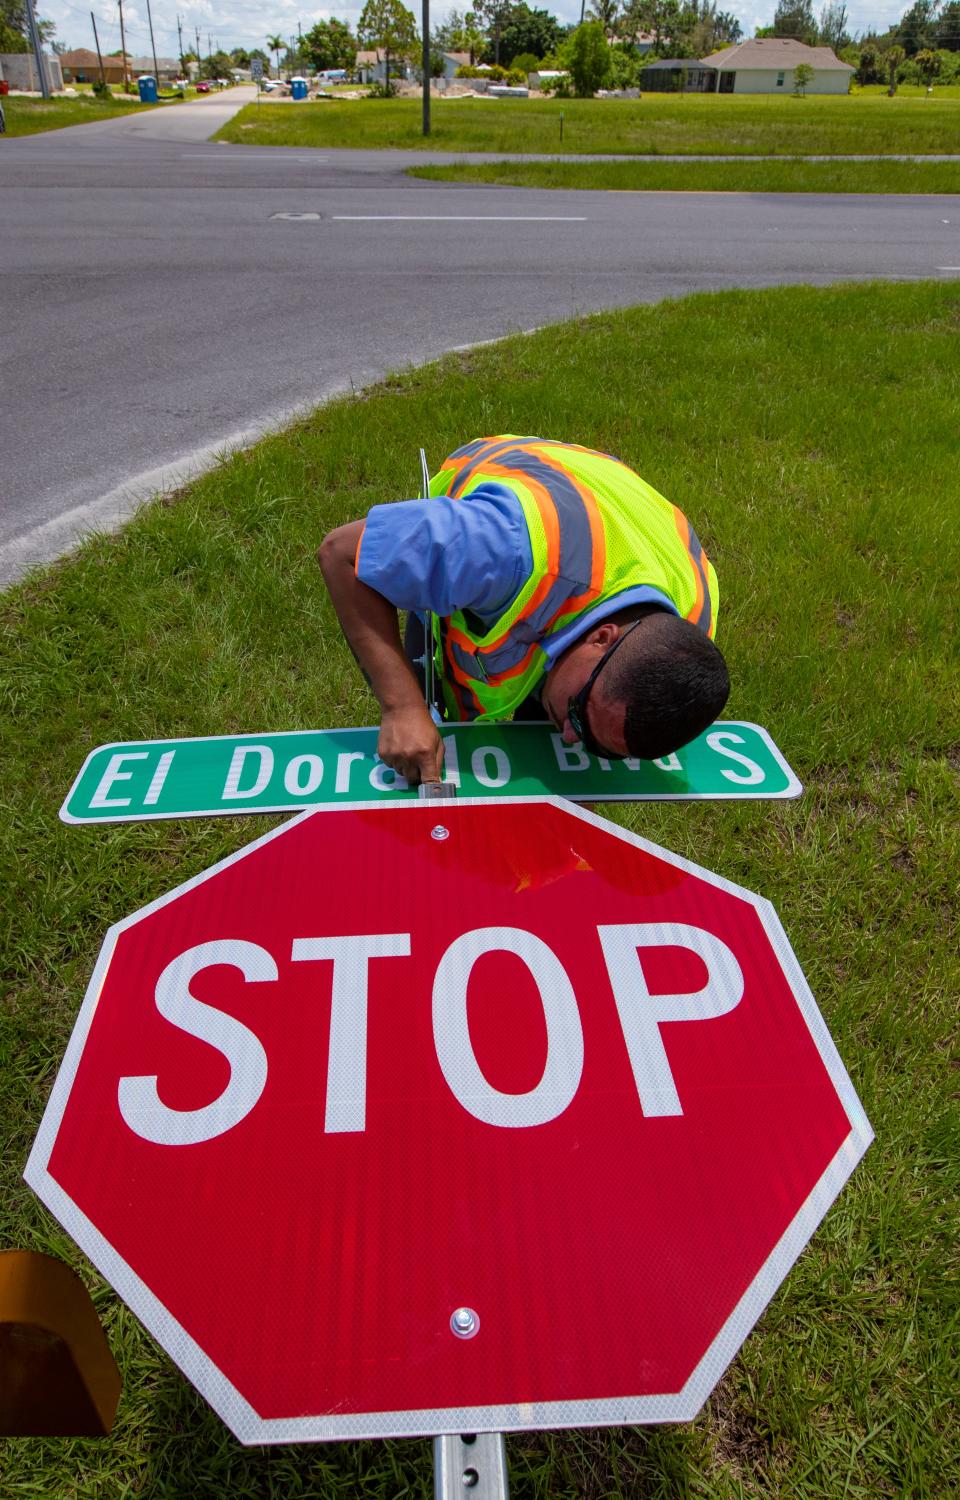 Edwin Castro, a traffic engineer for the City of Cape Coral, prepares new traffic signs at the intersection of El Dorado Parkway and SW 2nd Terrace on Friday July 8, 2022.